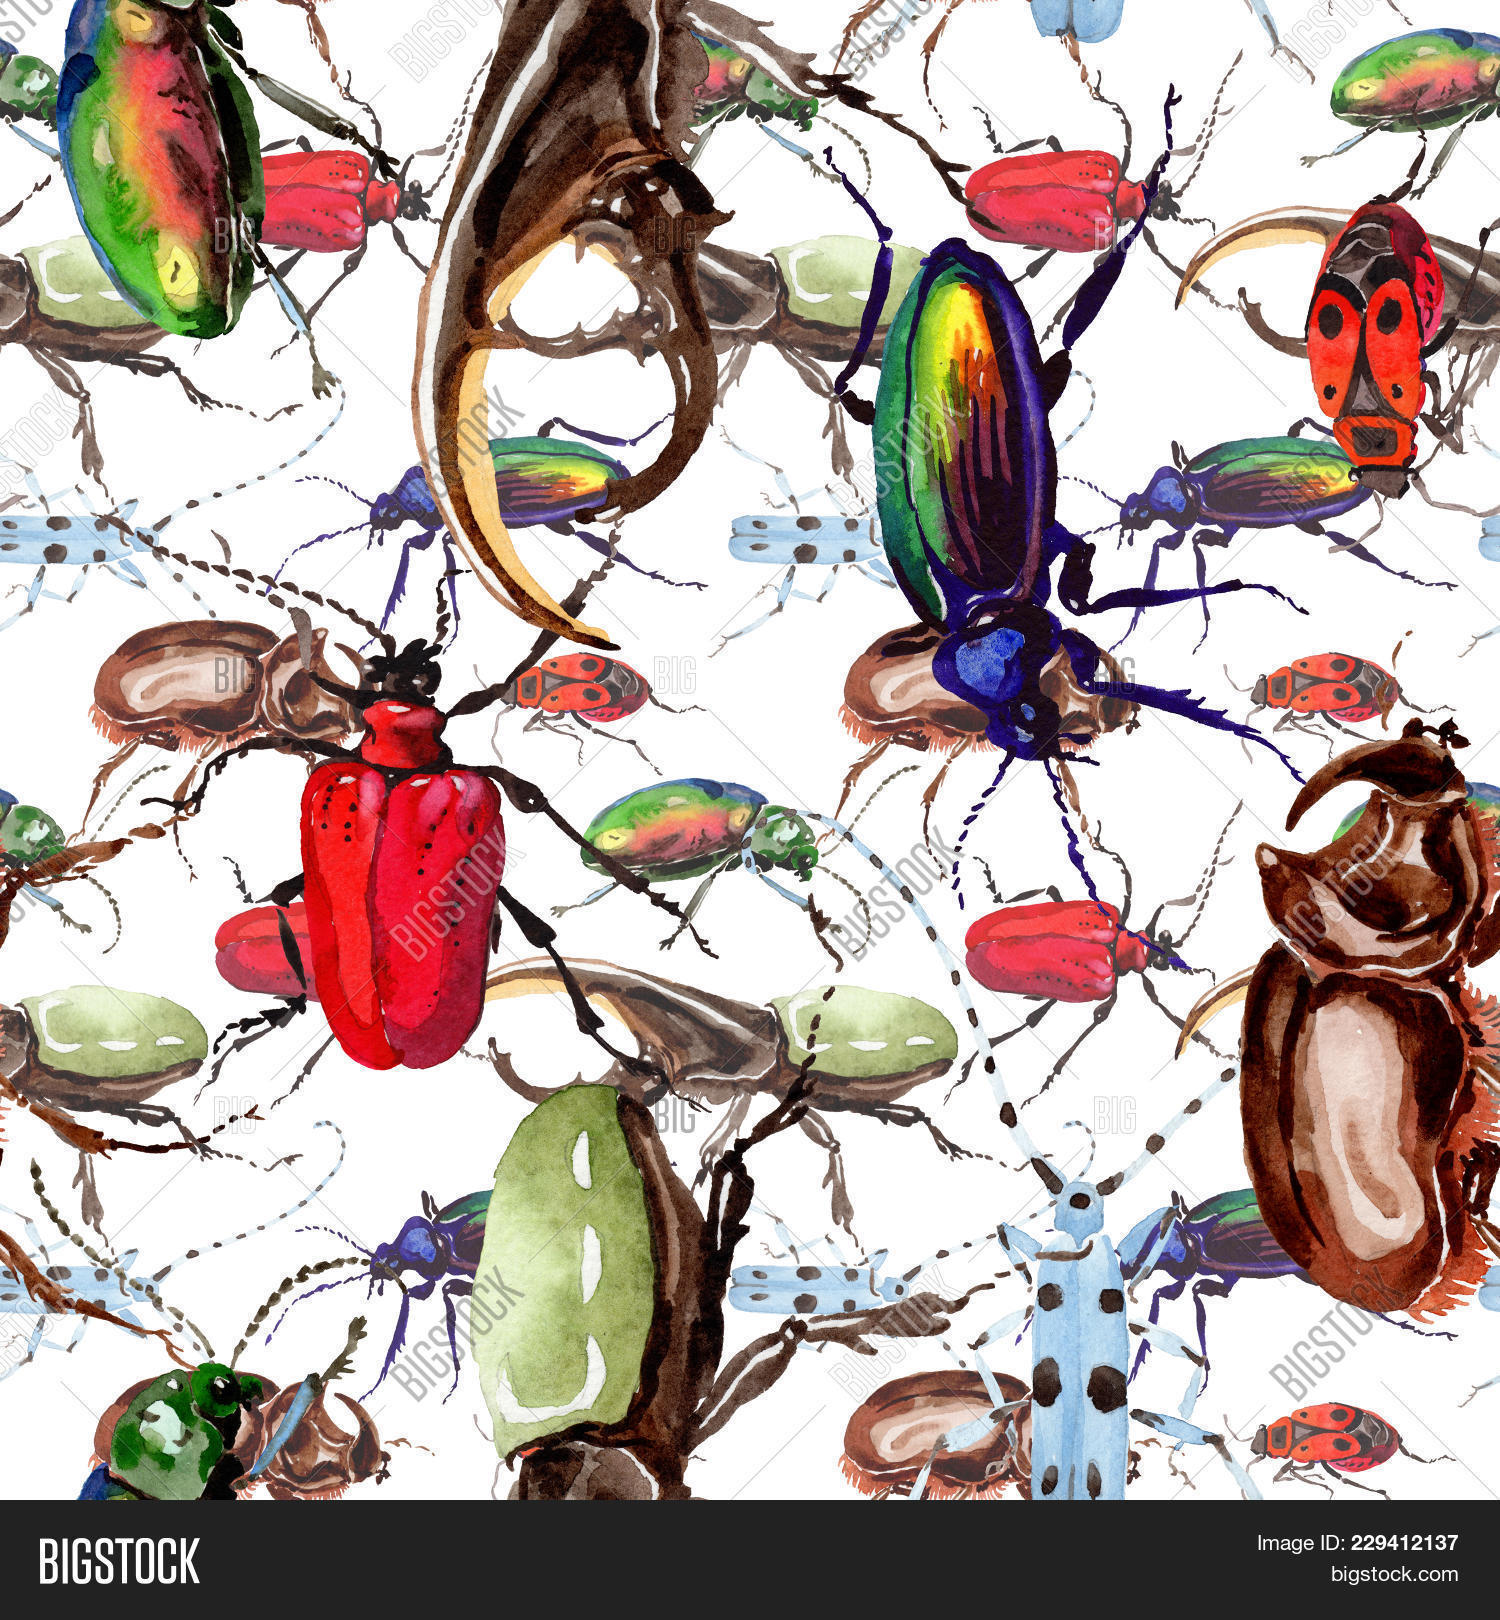 Exotic Beetles Wild Insect Pattern Image & Photo | Bigstock